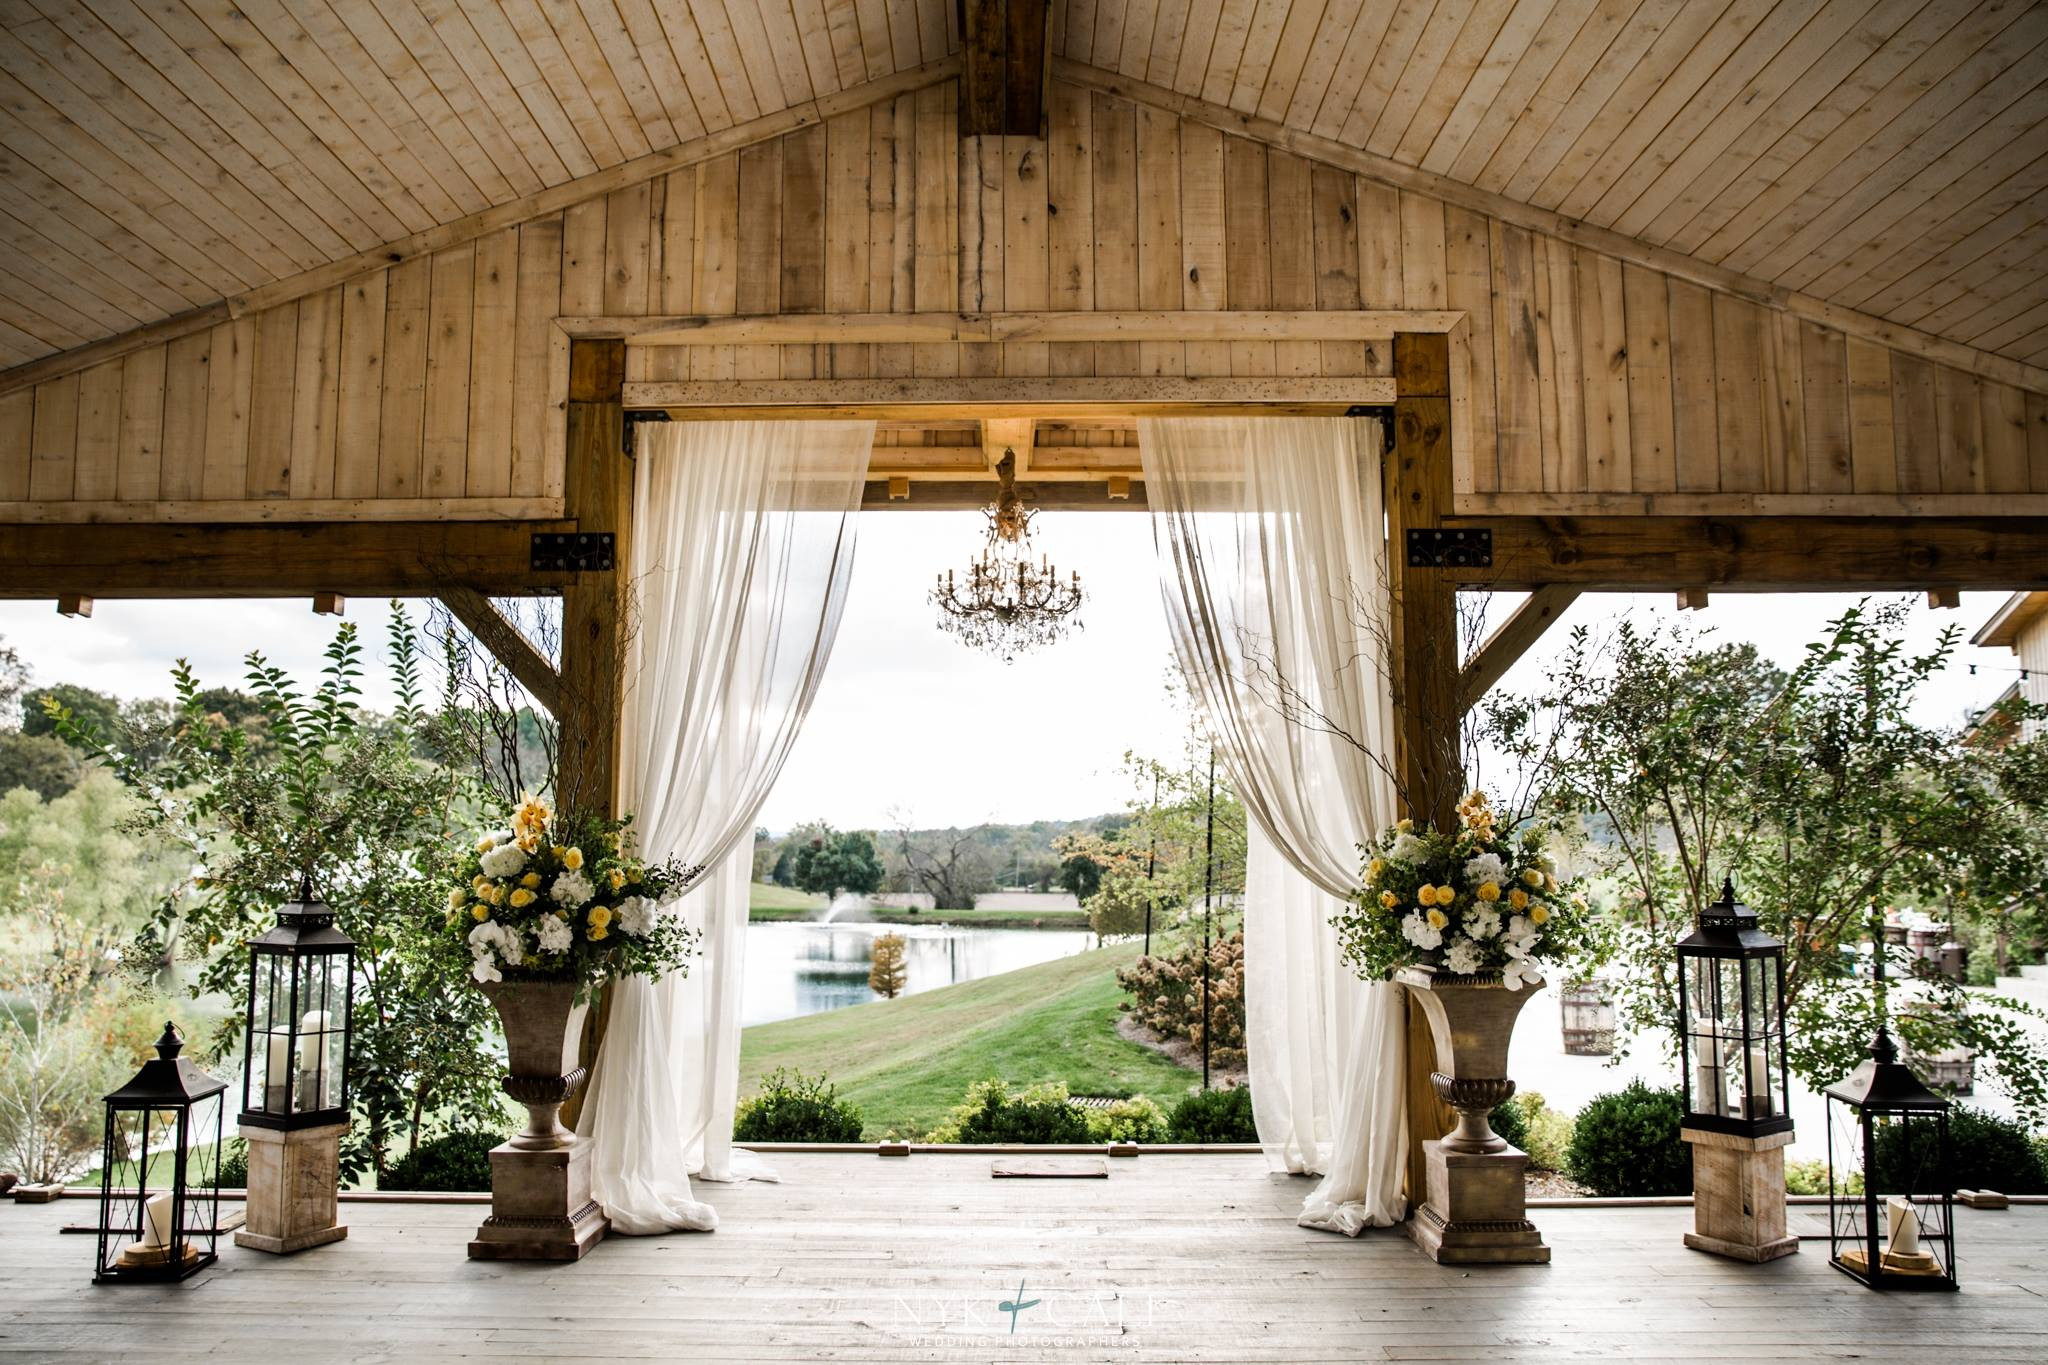 Tennessee Wedding Venues
 17 MORE Tennessee Wedding Venues That ll Make Your Jaw Drop